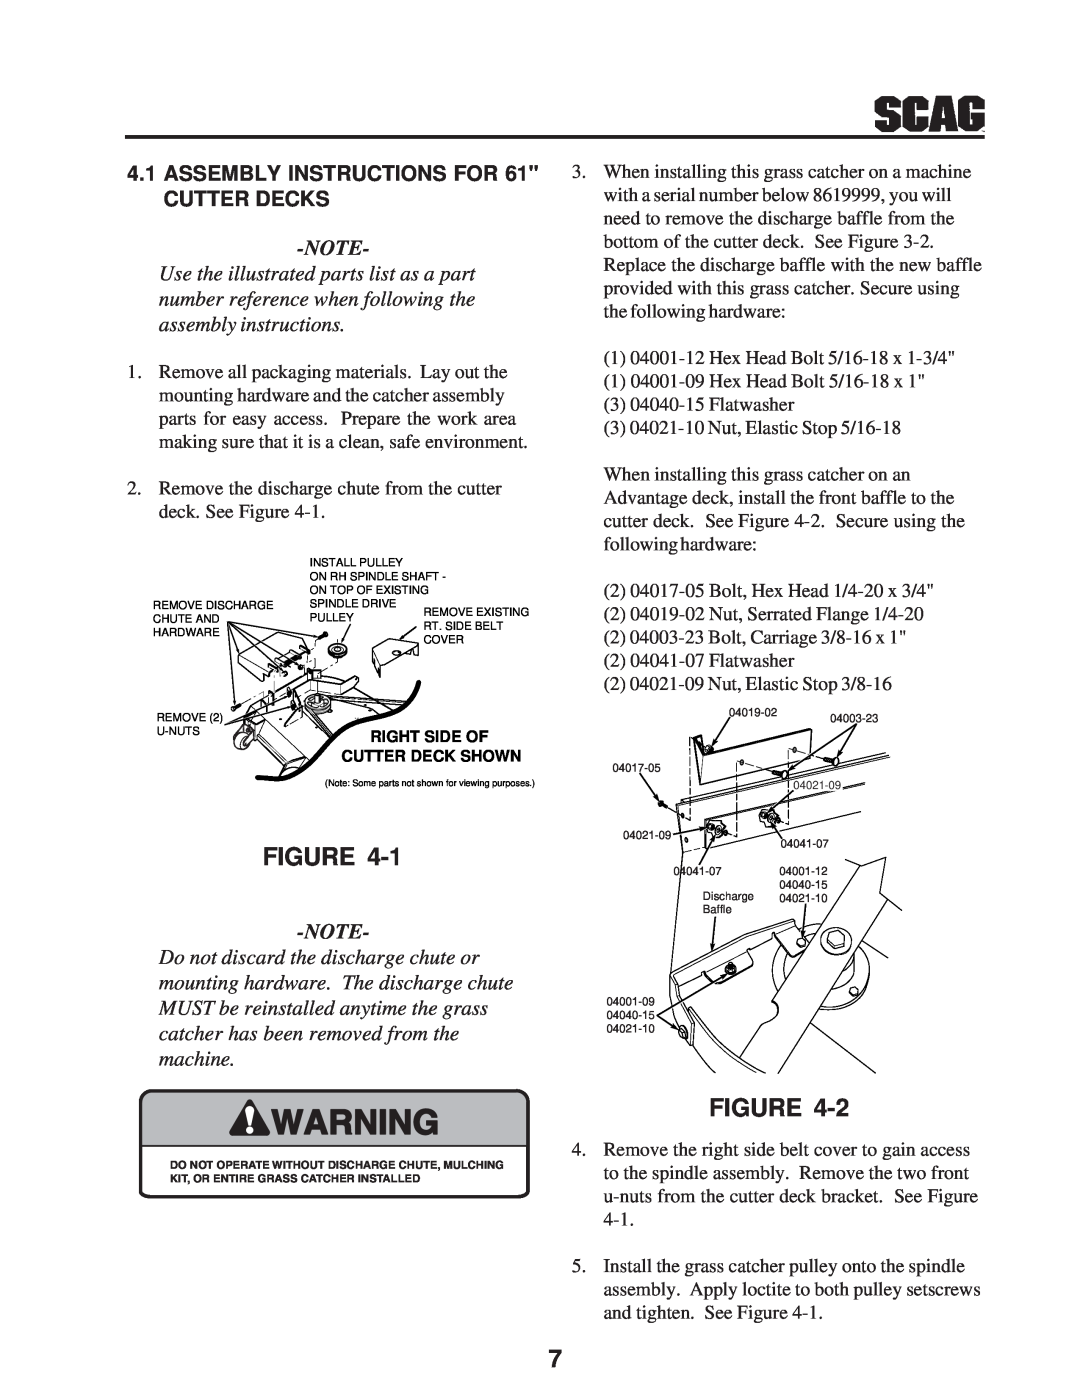 Scag Power Equipment GC-STT-CS manual ASSEMBLY INSTRUCTIONS FOR 61 CUTTER DECKS, Use the illustrated parts list as a part 